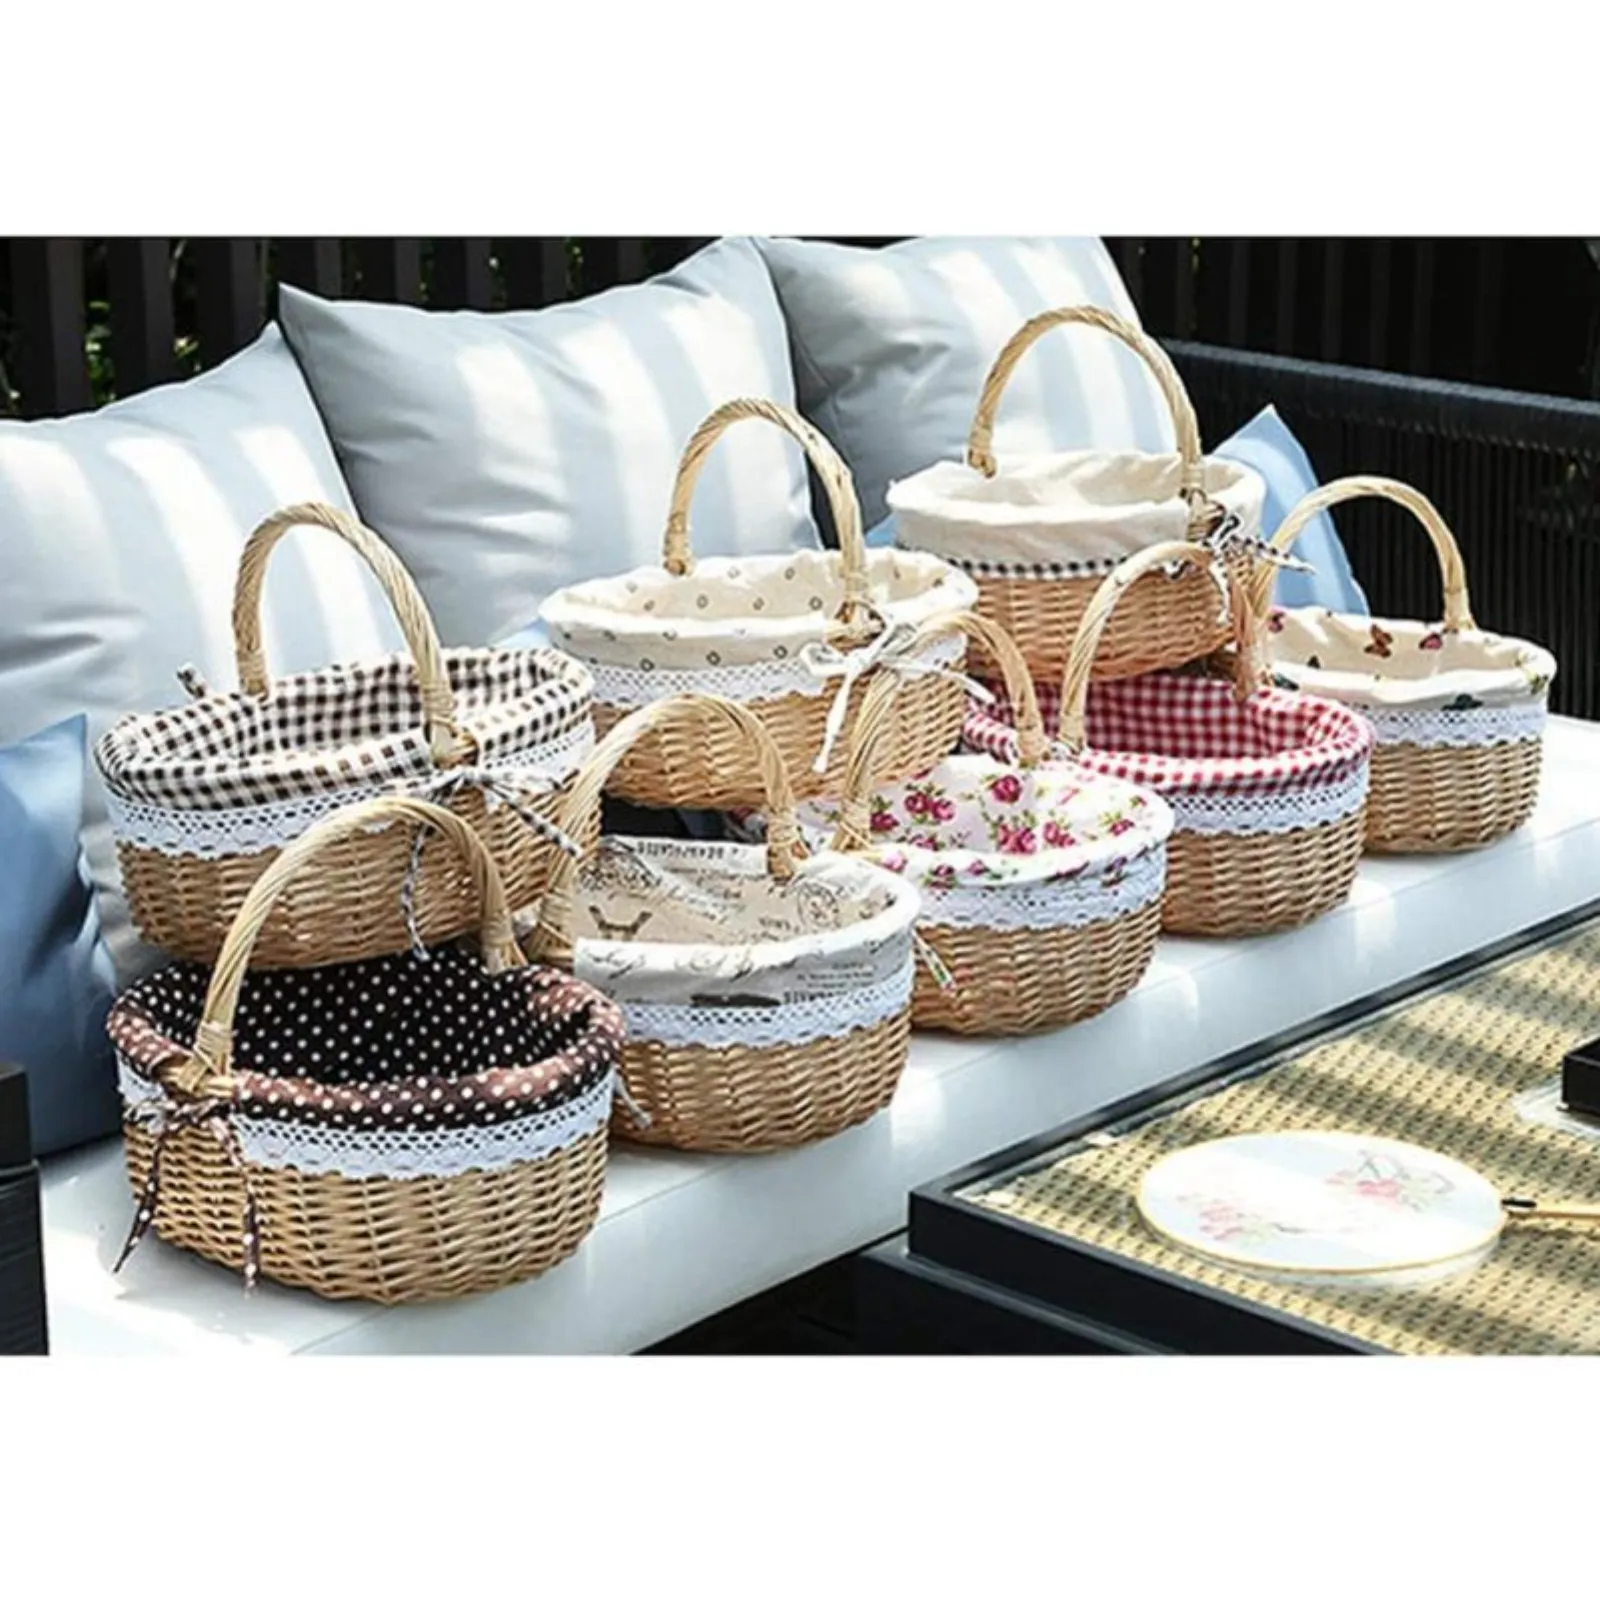 Empty Gift Basket Wholesale Cheap Handmade Oval Wooden Suppliers Wicker Fruit Basket Empty Gift Basket With Handle